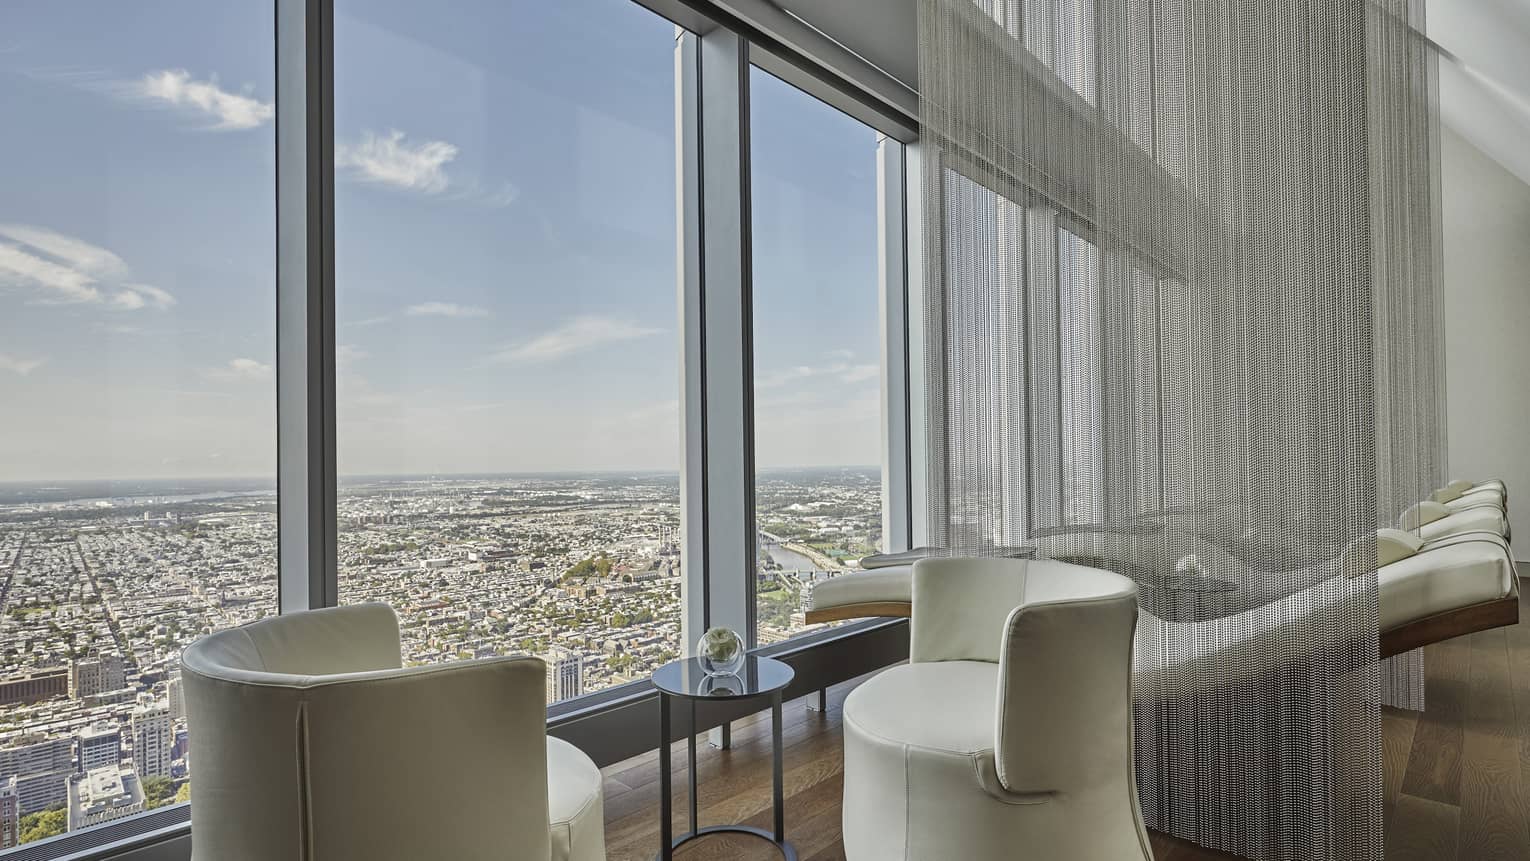 Lounge with two beige chairs and windows overlooking the city.